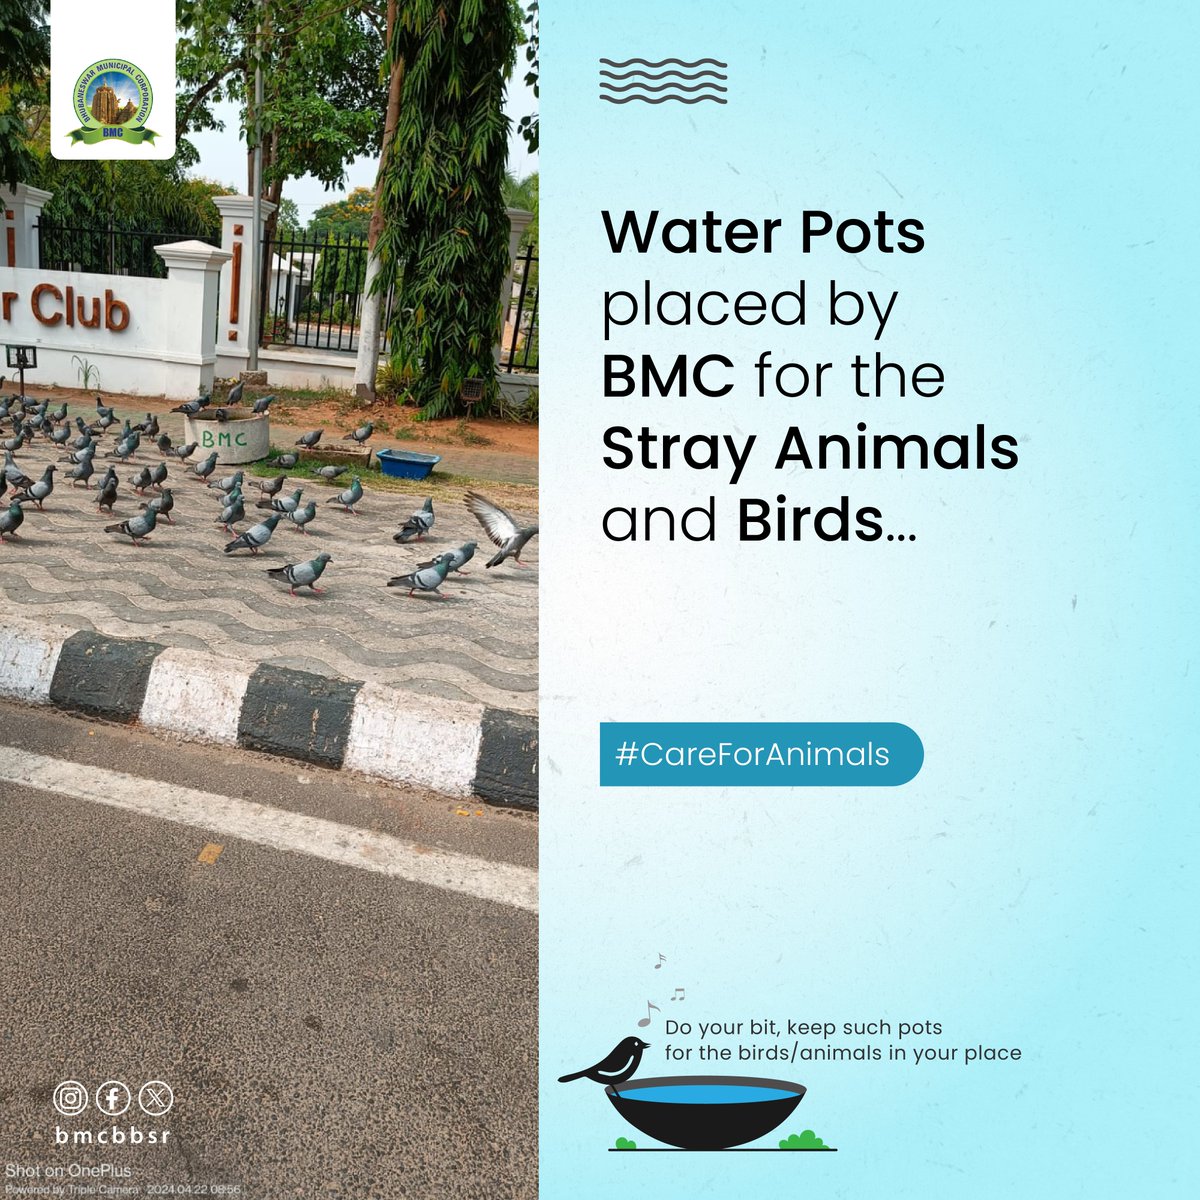 The water pots placed by BMC at many places across the city for the animals/birds are helping them quench their thirst in this hot weather. We request all citizens to come forward and do their bit by keeping water pots in their place for the stray animals/birds. #CareForAnimals